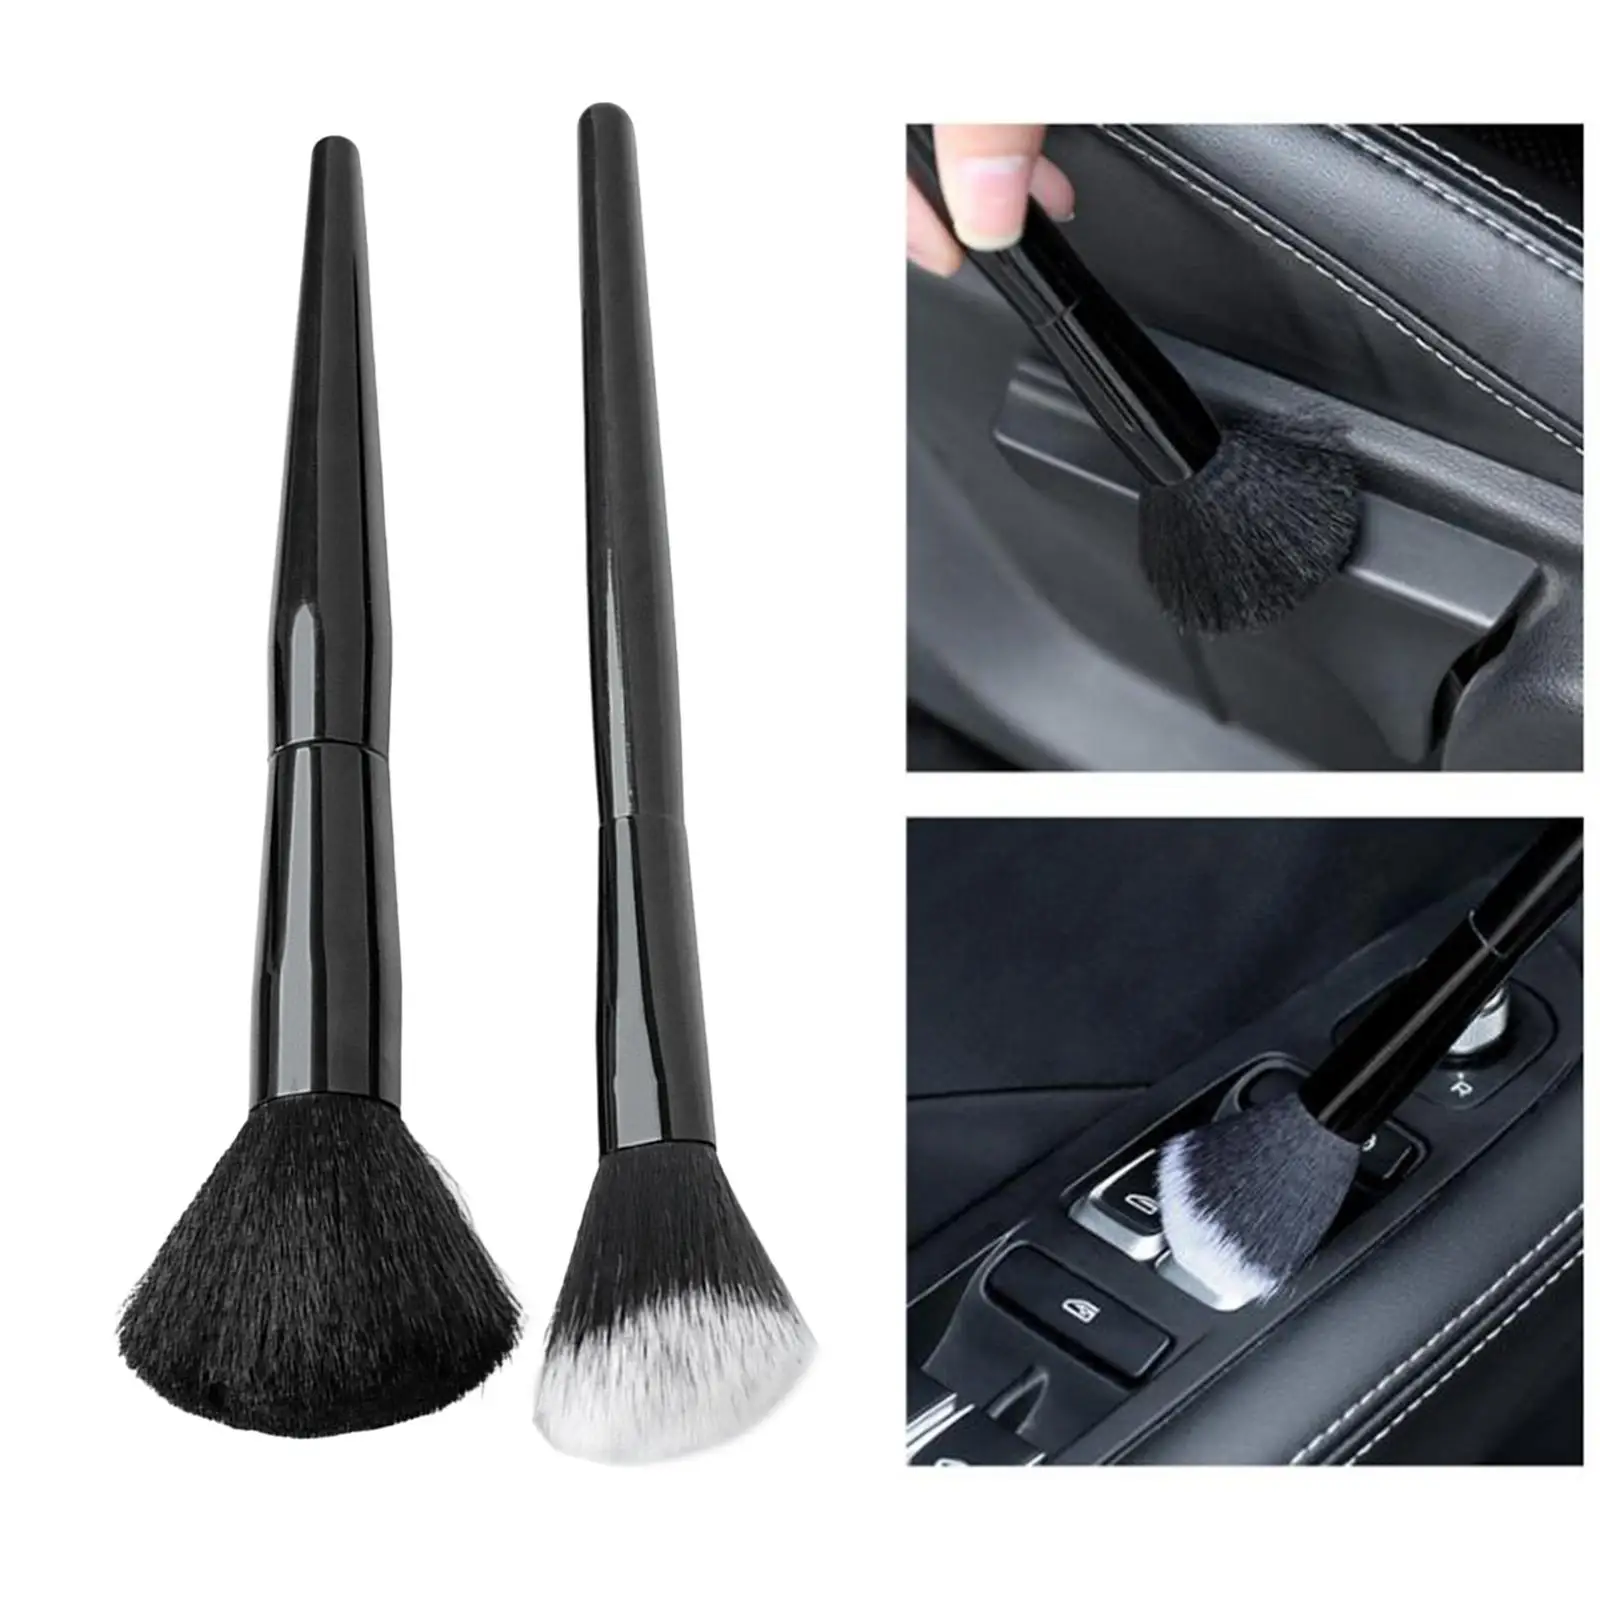 2 Pieces Car Detailing Brushes, Wash Cleaning Supplies Detail Cleaning